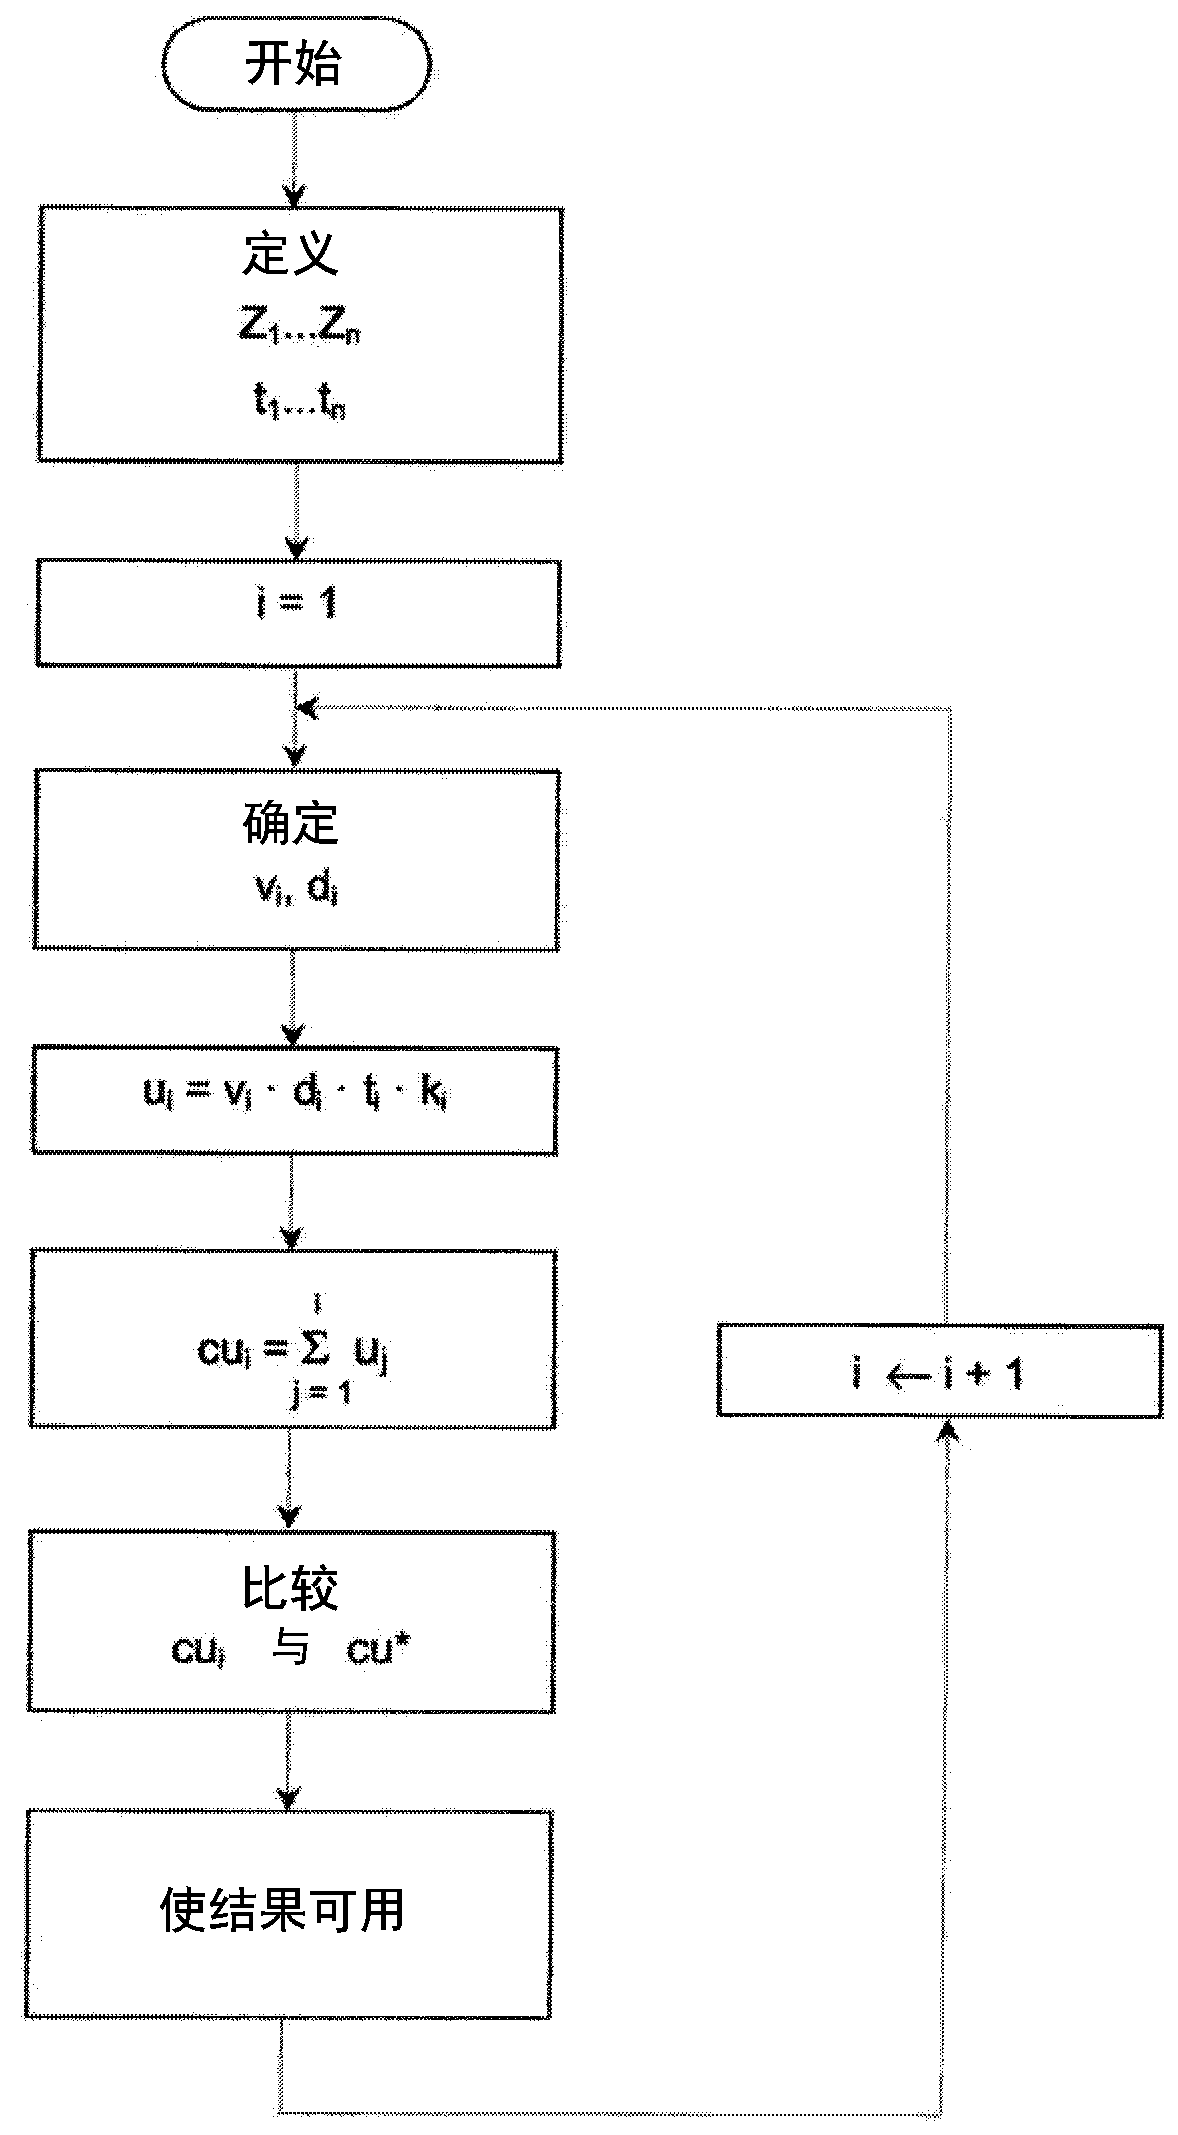 Method for monitoring a device for regulating gas flow and regulating system using said method